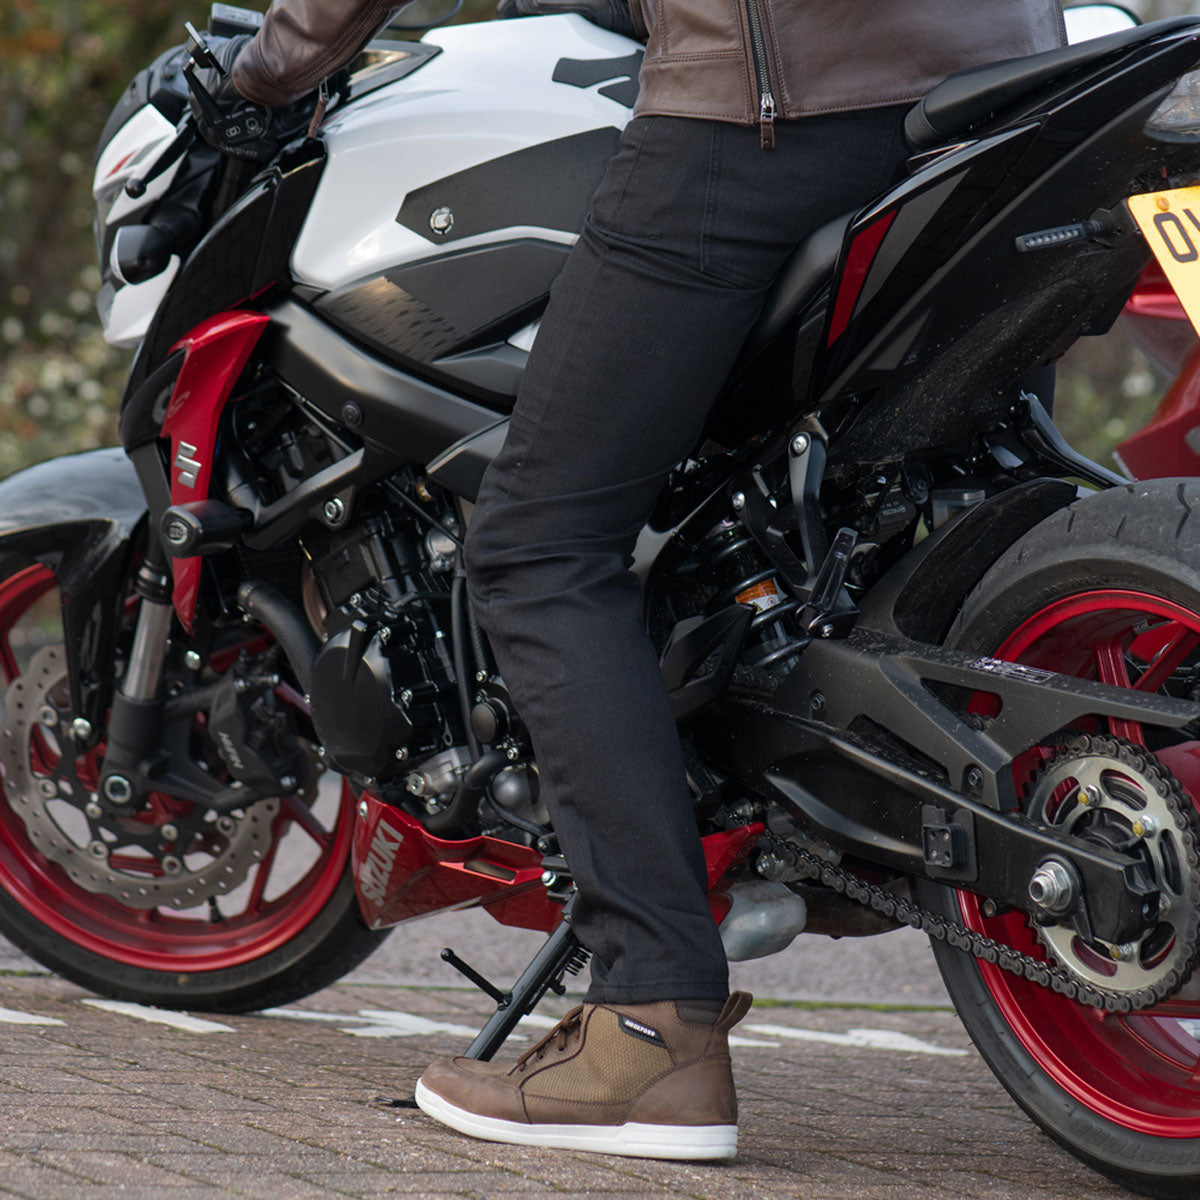 These awesome Oxford OA AA Dynamic Jeans are specially designed for motorcycle riders like you.